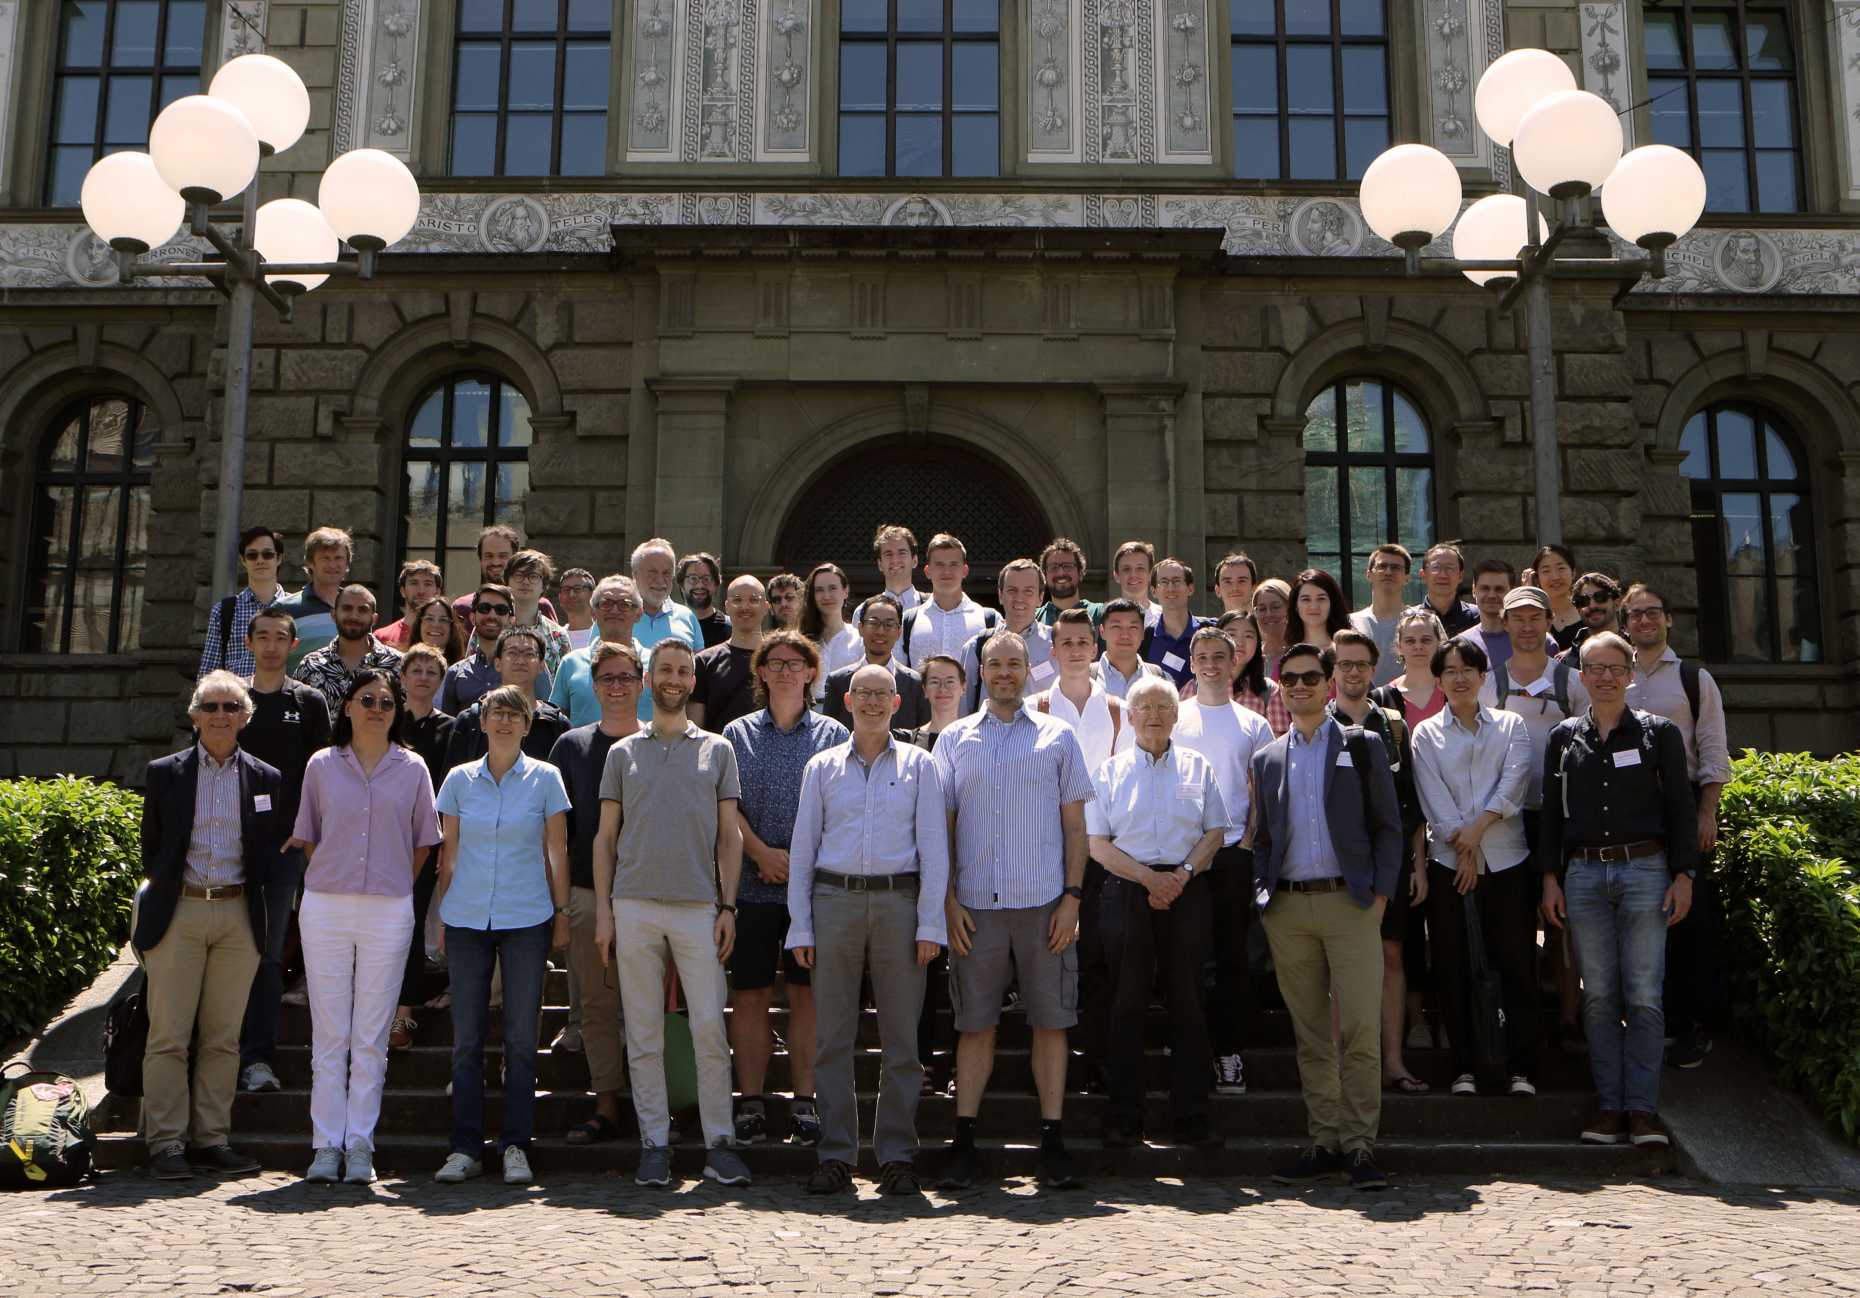 Enlarged view: Schweizer conference group photo